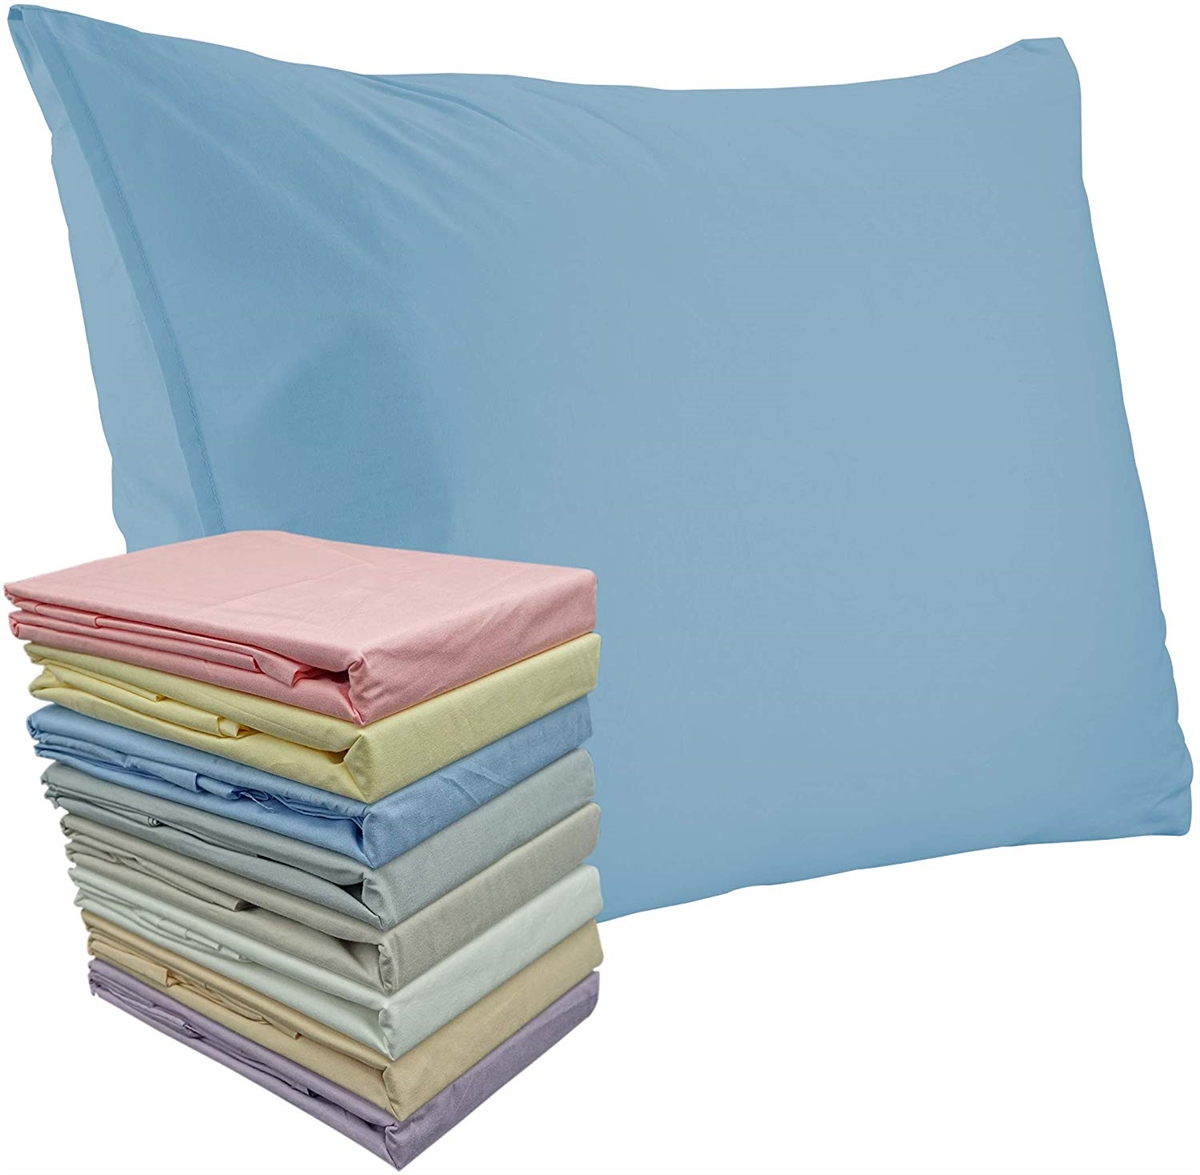 Superior Linen Set of 2 Pillow Cases in Blue